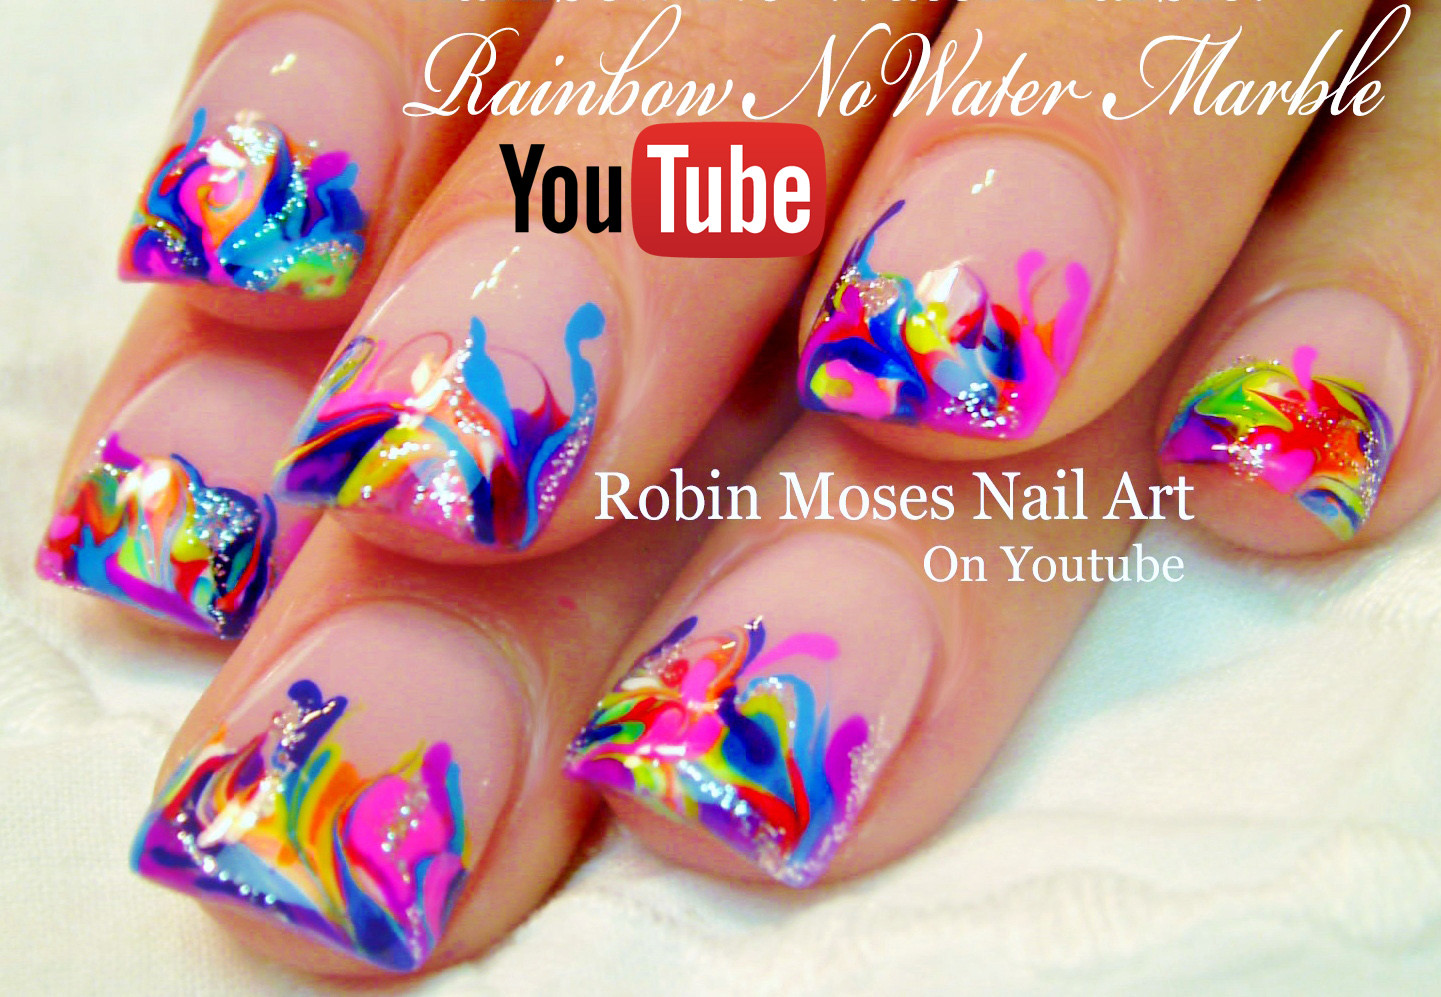 Robin Moses Nail Art Fan Page - Home - wide 3